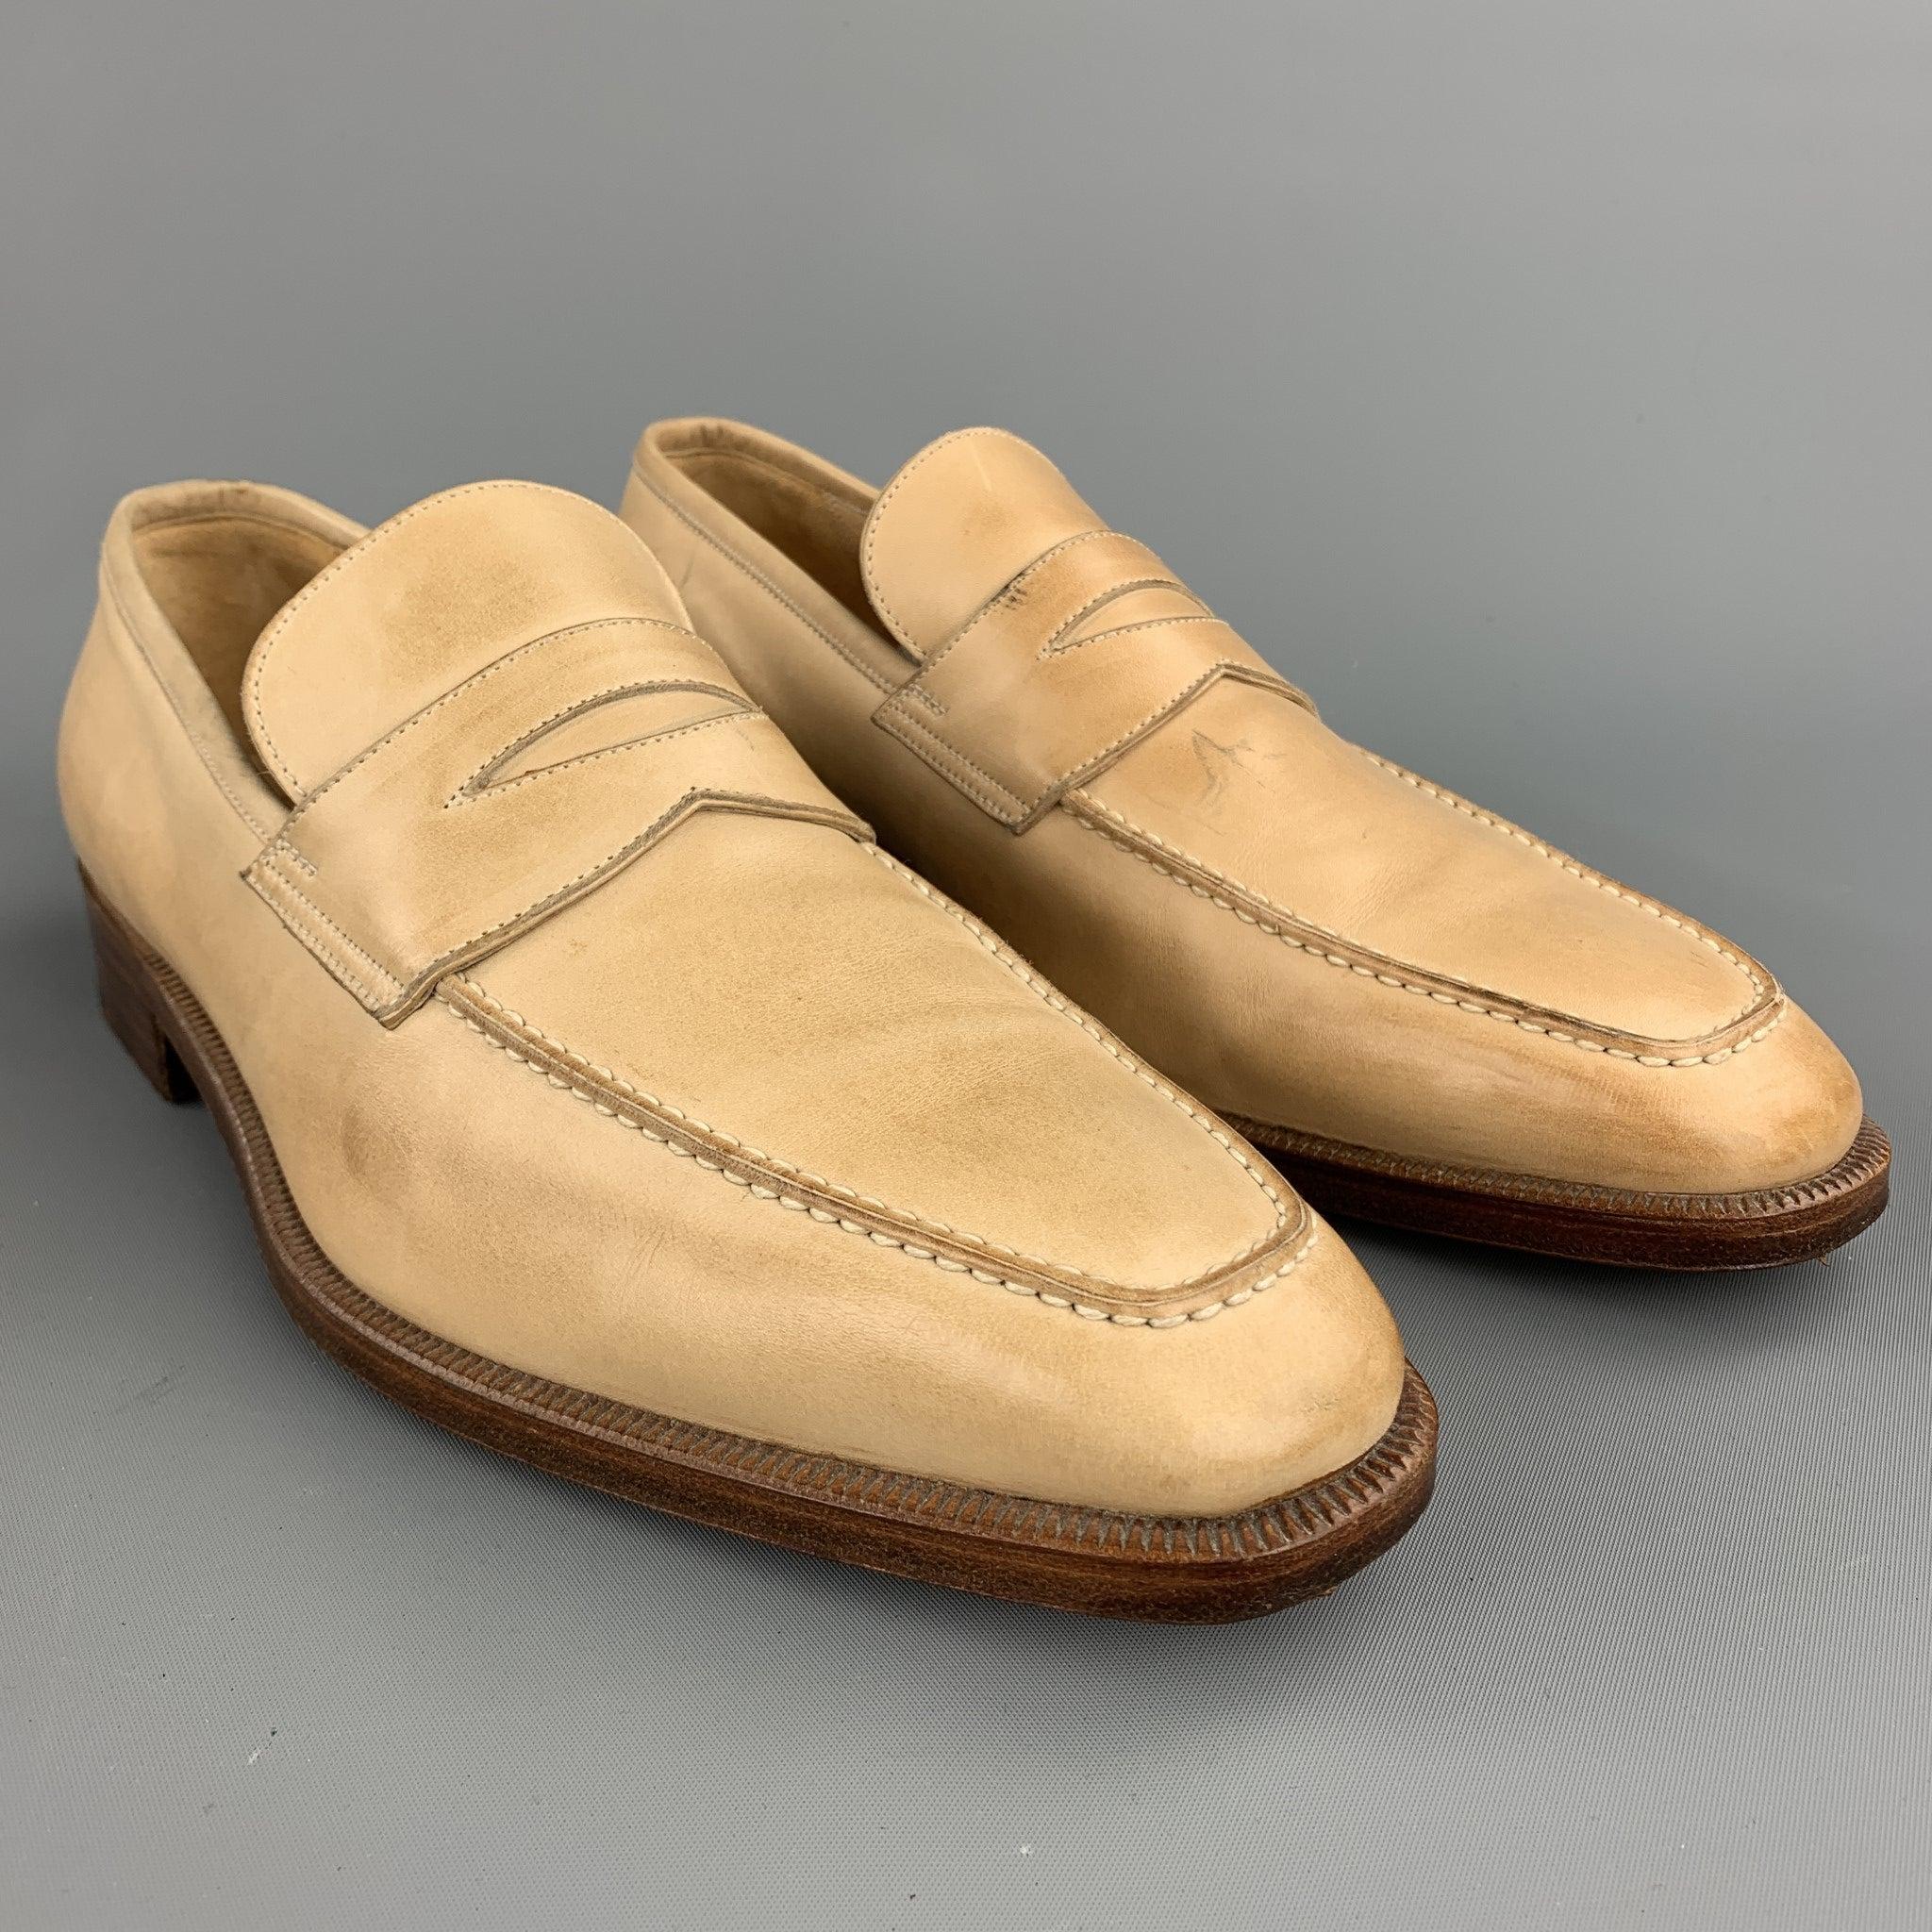 GRAVATI per WILSON and DEAN for WILKES BASHFORD loafers comes in a natural leather featuring a penny strap, contrast stitching, and a wooden sole. Wear throughout. Made in Italy.Very Good
Pre-Owned Condition. 

Marked:   8.5 MOutsole:11.5 inches  x